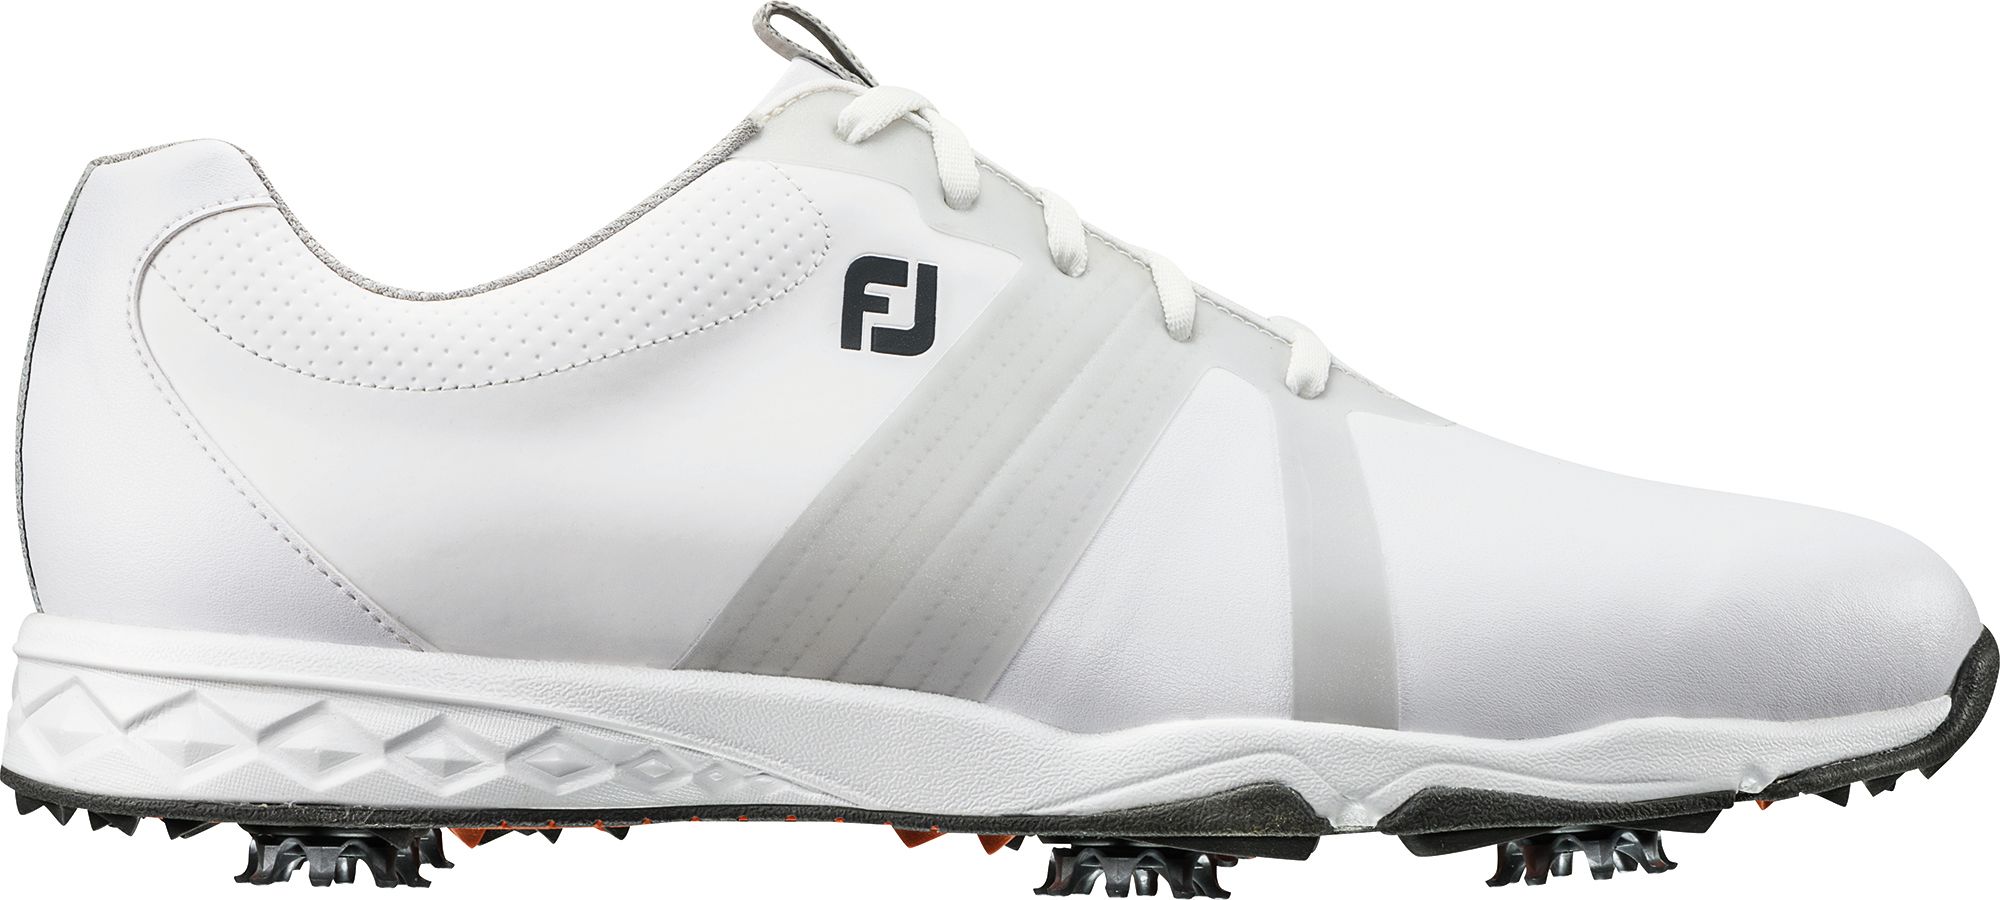 Spiked Golf Shoes For Men | Golf Galaxy